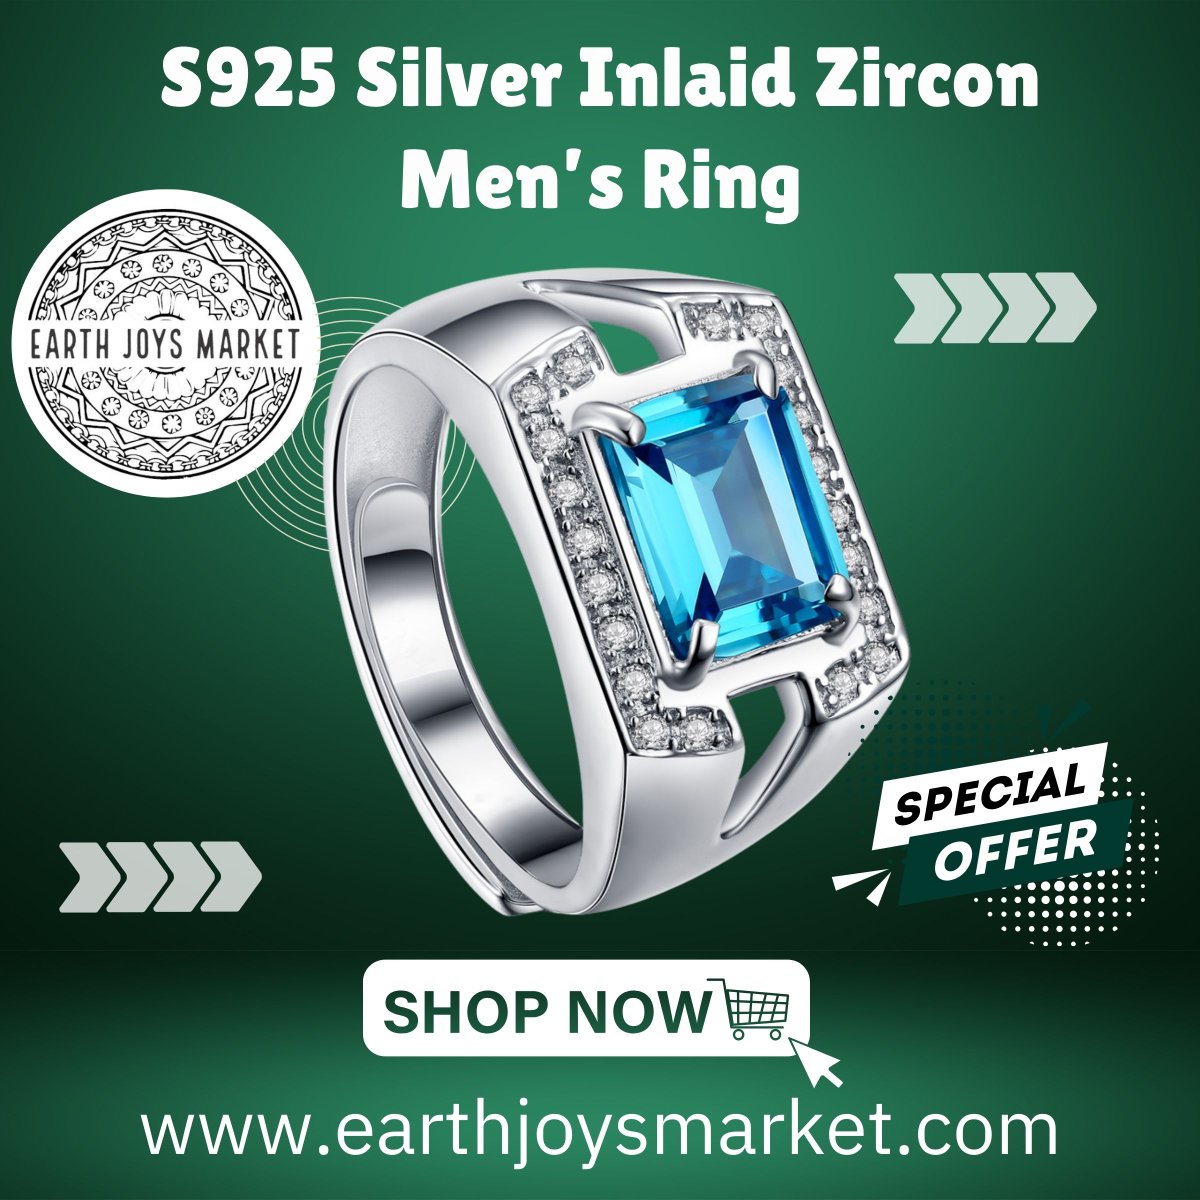 'Discover Elegance: S925 Silver Men’s Ring at Earth Joys Market!'

Shop Now: ➡ earthjoysmarket.com/product/s925-s…

#EarthJoysMarket #FineJewelry #WeddingRing #MensRing #BuyNow #OnlineShop #rings #ShopNow #jewelry #jewelryshop #weddingring #luxuryjewels #luxuryjewelry #finejewels🛍️